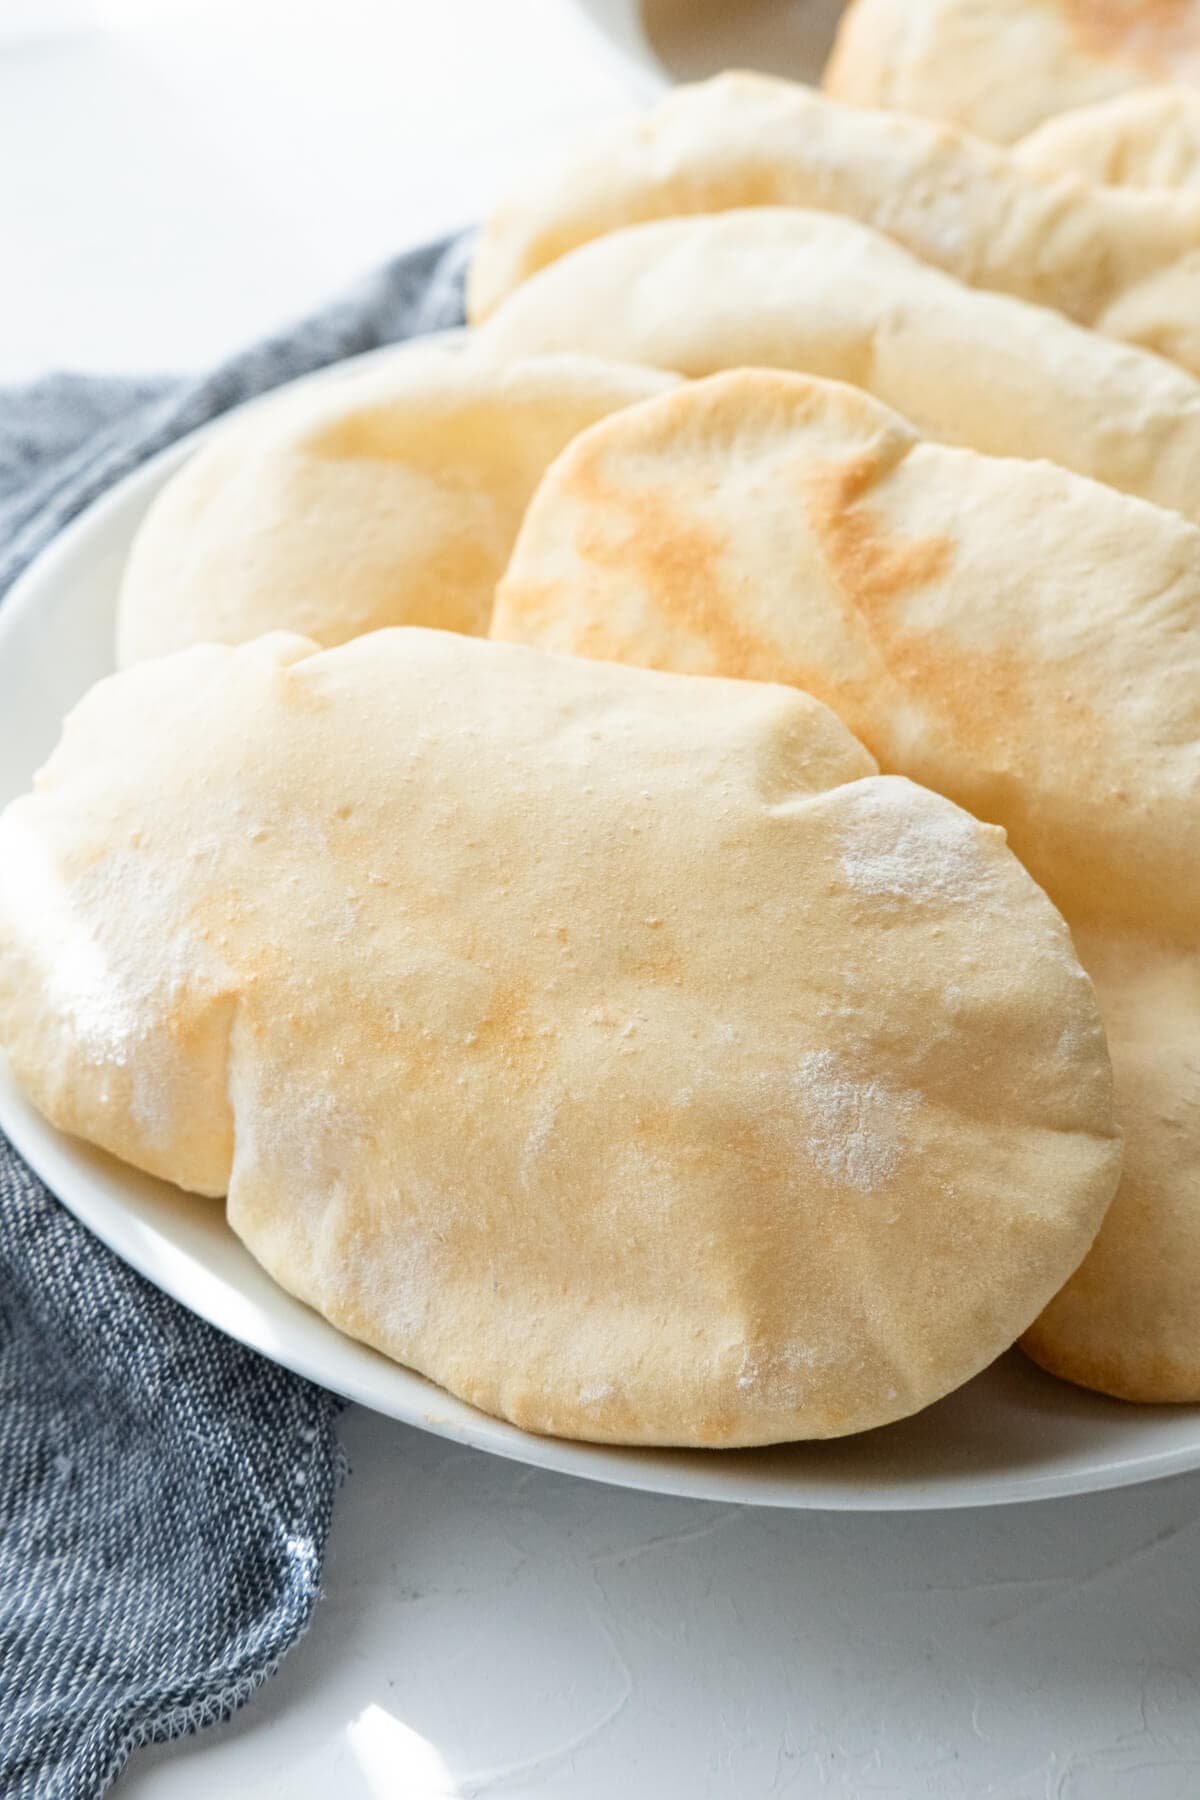 Soft pita breads with a slightly browned crust served on a plate. 